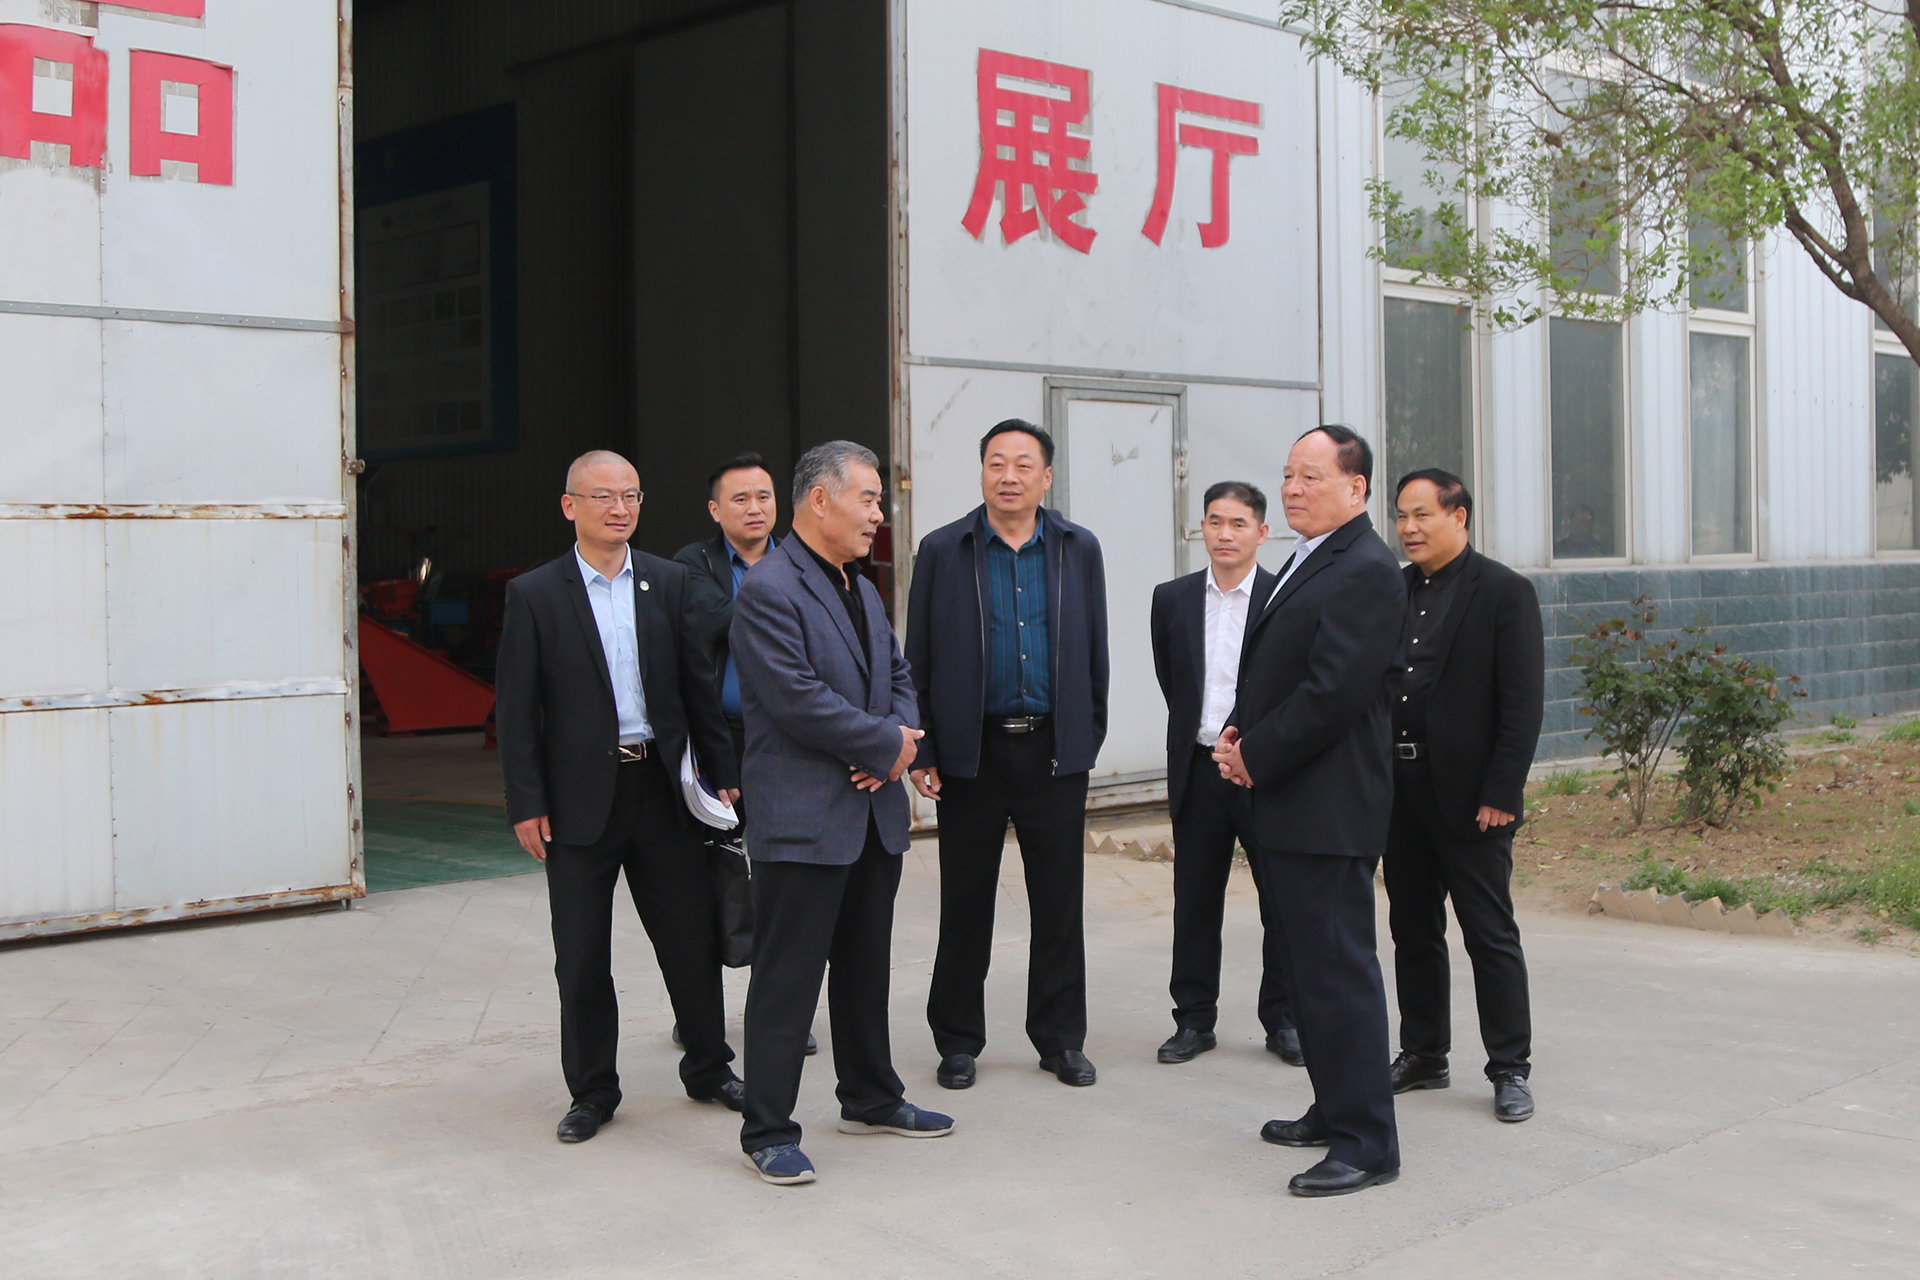 Warmly Welcome Jining Weishan Lake Chamber Of Commerce Chairman Jiao And His Party To Visit China Coal Group For Inspection And Cooperation